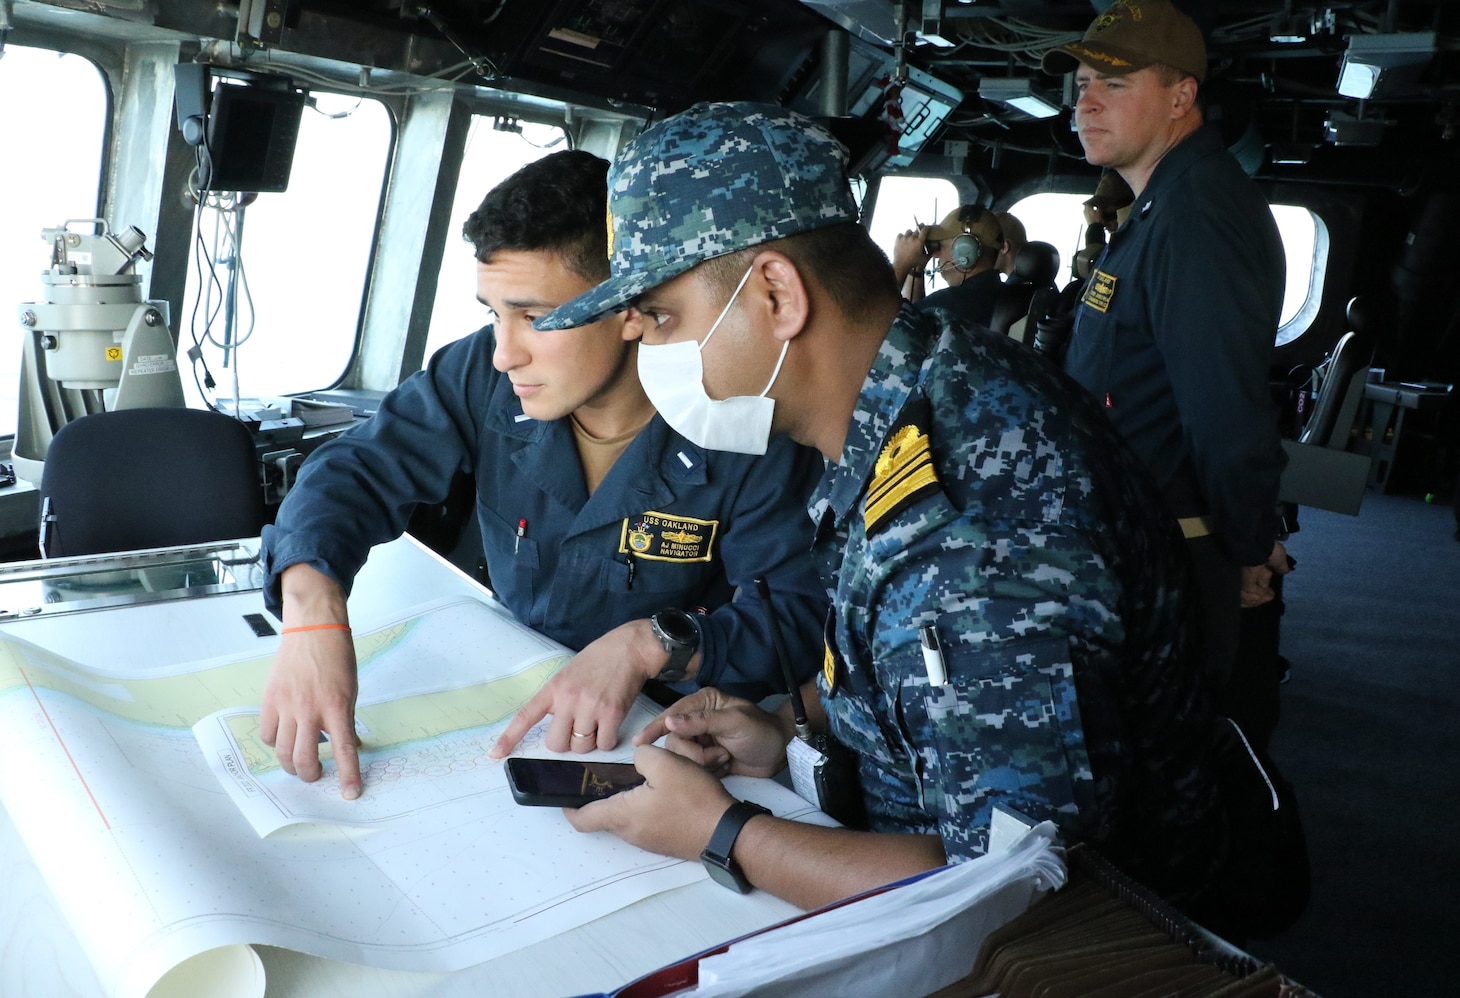 COX’S BAZAR, Bangladesh (Dec. 5, 2022) – Lt. Anthony Minucci, from Wauwatosa, Wisconsin, navigator for the Independence-variant littoral combat ship USS Oakland (LCS 24), coordinates anchoring position with a Bangladesh Navy (BN) officer prior to International Fleet Review 2022 in Cox’s Bazar, Bangladesh, Dec. 5. Oakland is participating in IFR 2022 organized by the Bangladesh Navy, which intends to promote good will, strengthen cooperation and serve as an ideal platform for world’s navies to showcase their prowess, naval diplomacy, and cooperation in a global arena. (U.S. Navy courtesy photo)